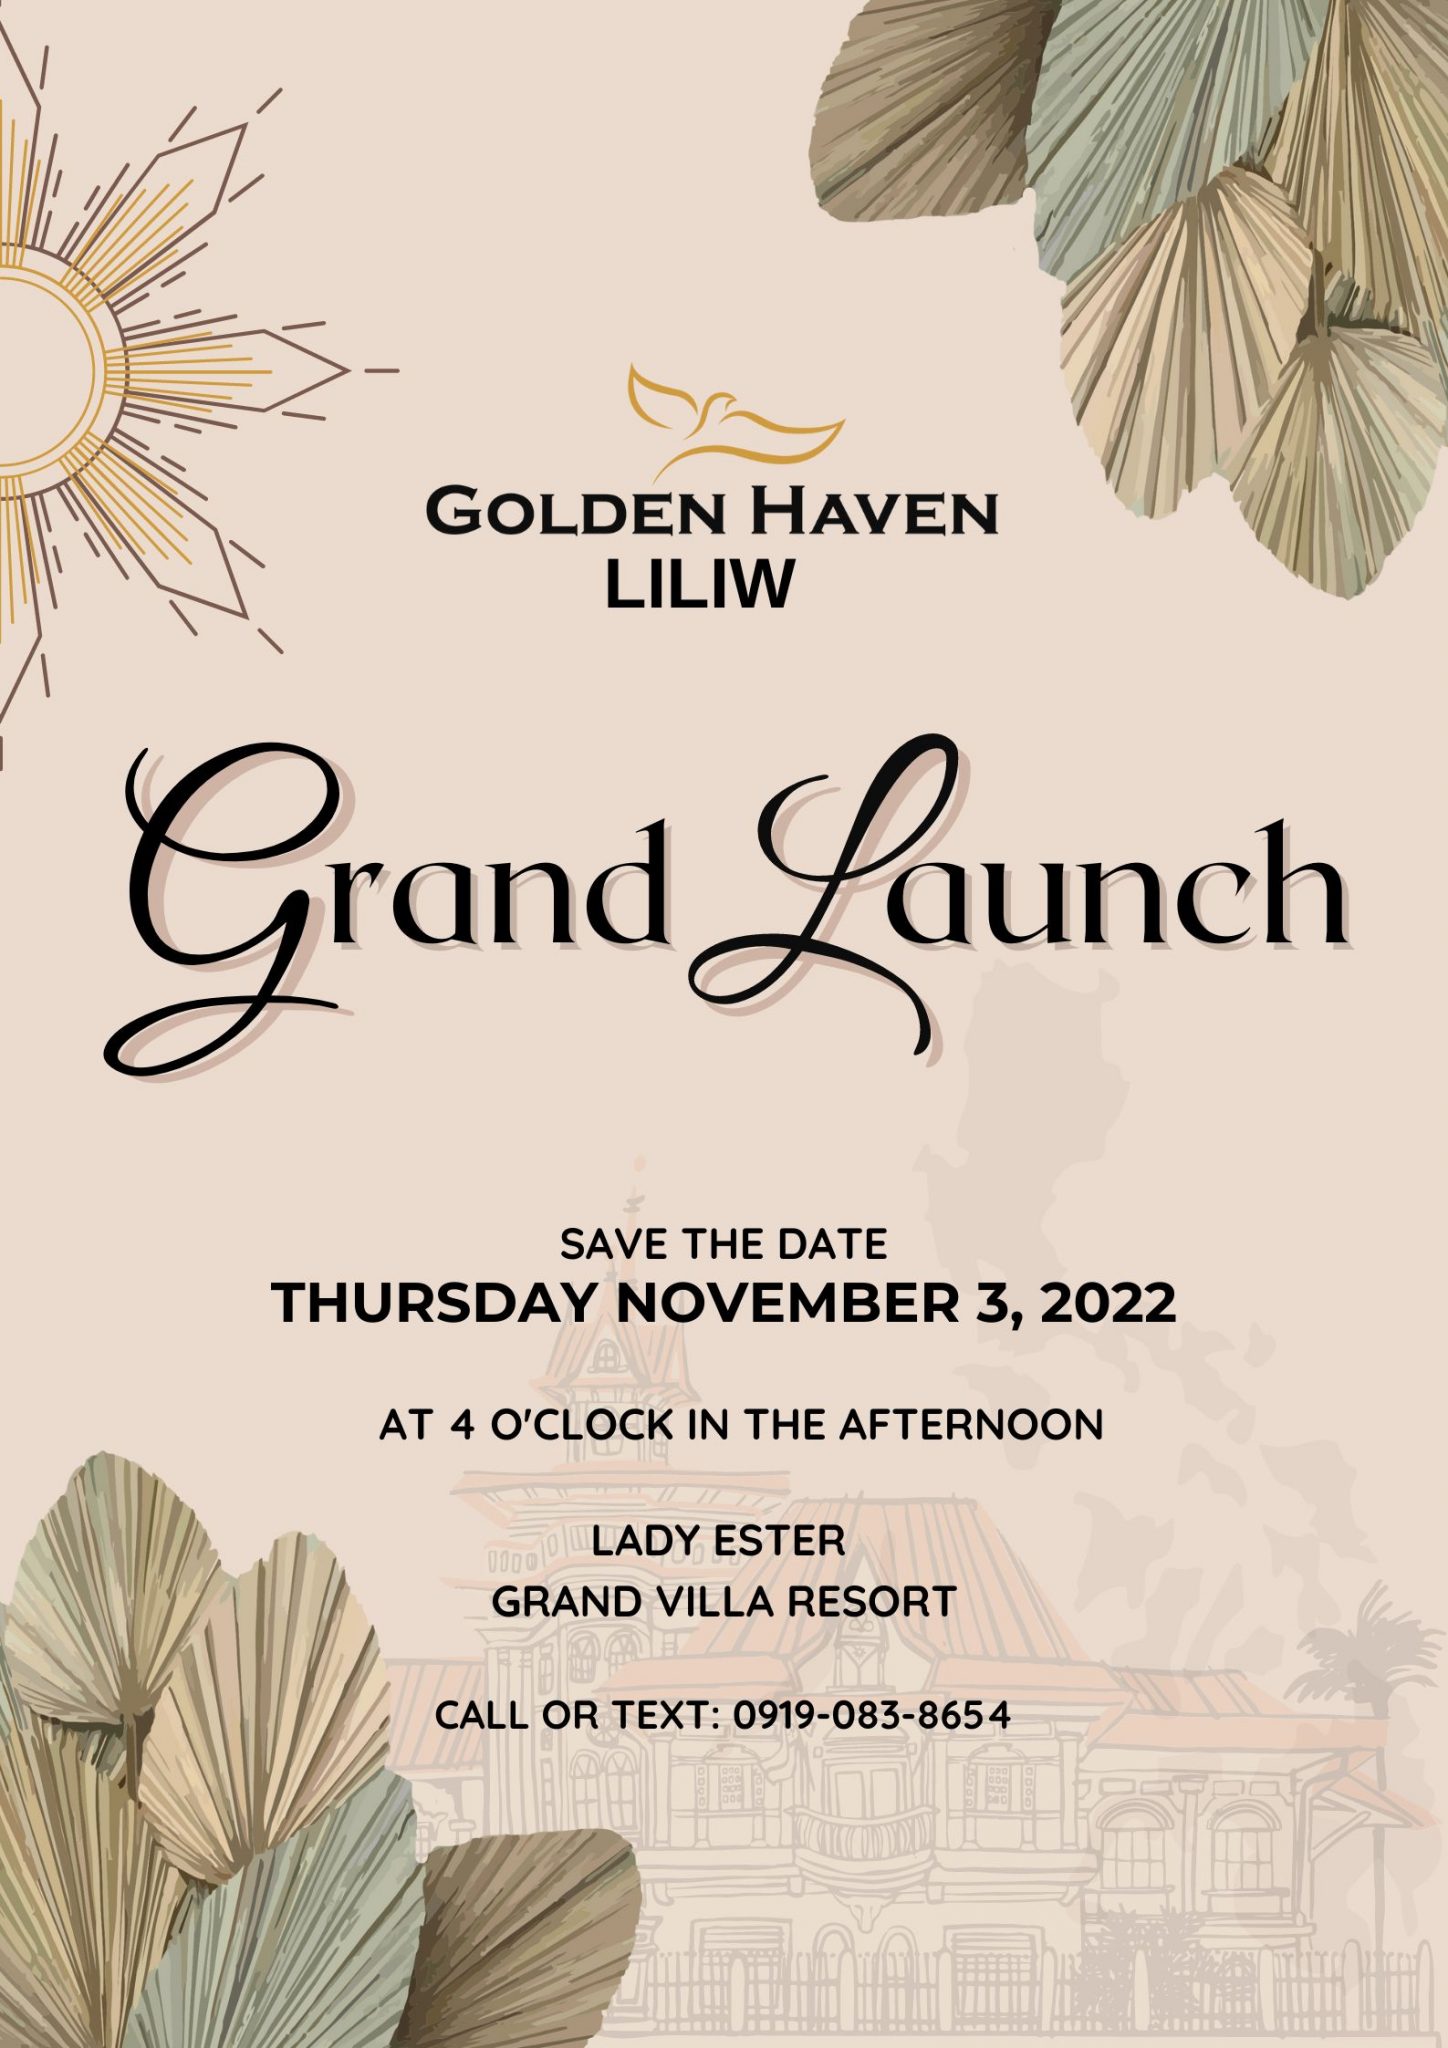 Golden Haven Liliw Grand Launch